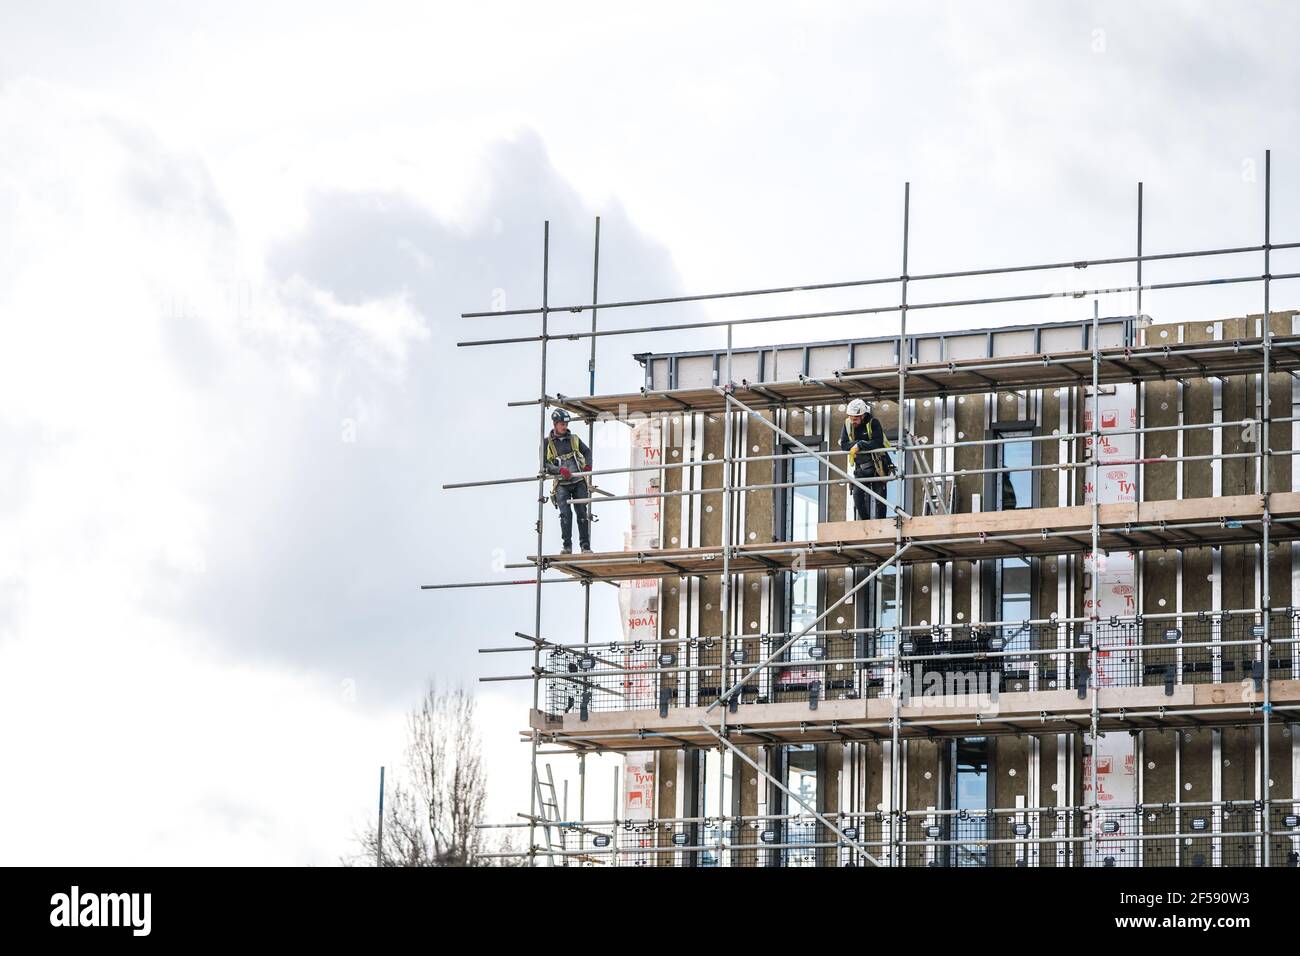 Scaffolder PPE erecting framework tall scaffolding poles high up modern new building construction site. Dangerous job safety equipment and tools Stock Photo